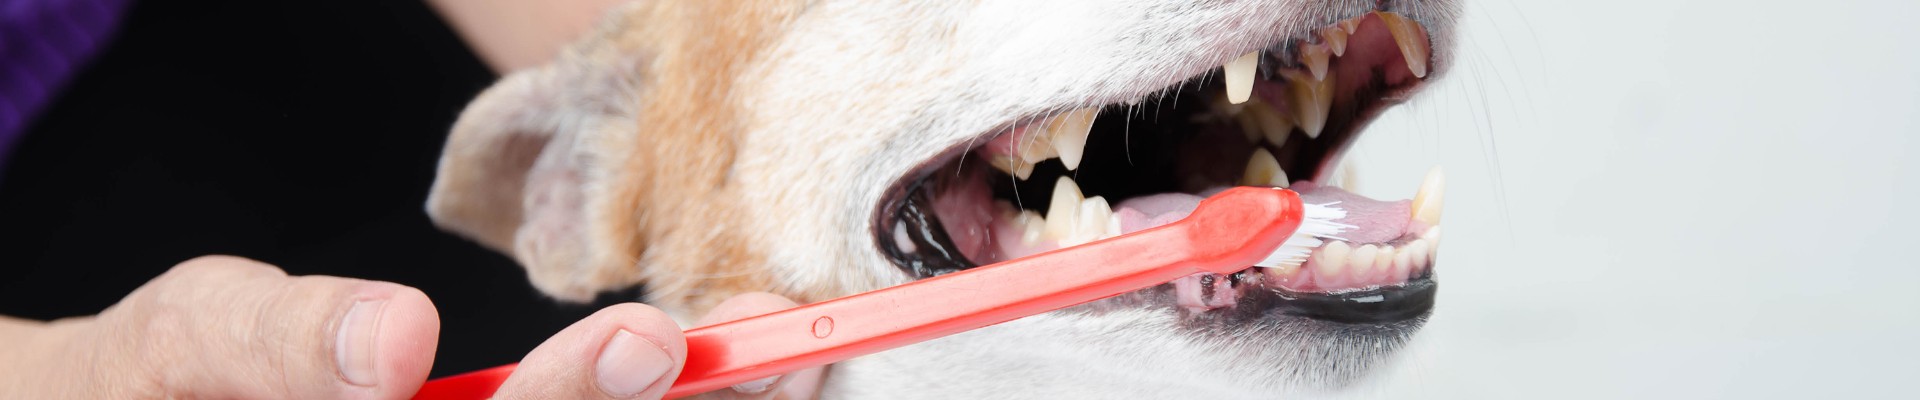 A dog with an orange toothbrush in its mouth